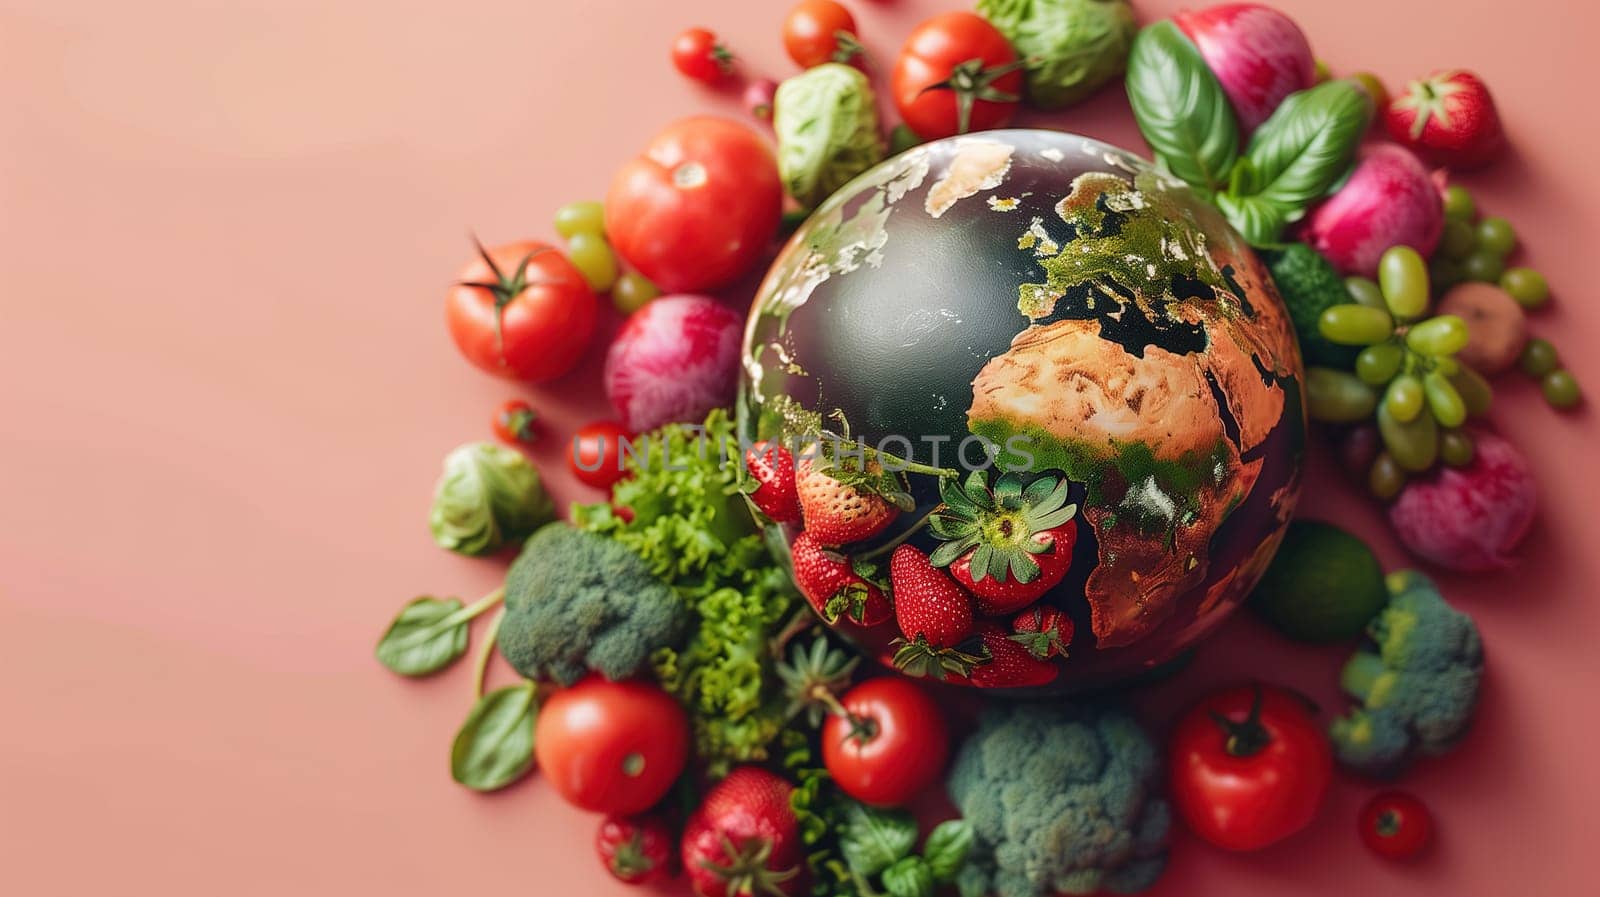 A globe is positioned in the center of the image, encircled by an assortment of fruits and vegetables. The pink background highlights the vibrant colors of the produce, creating a dynamic and lively composition.